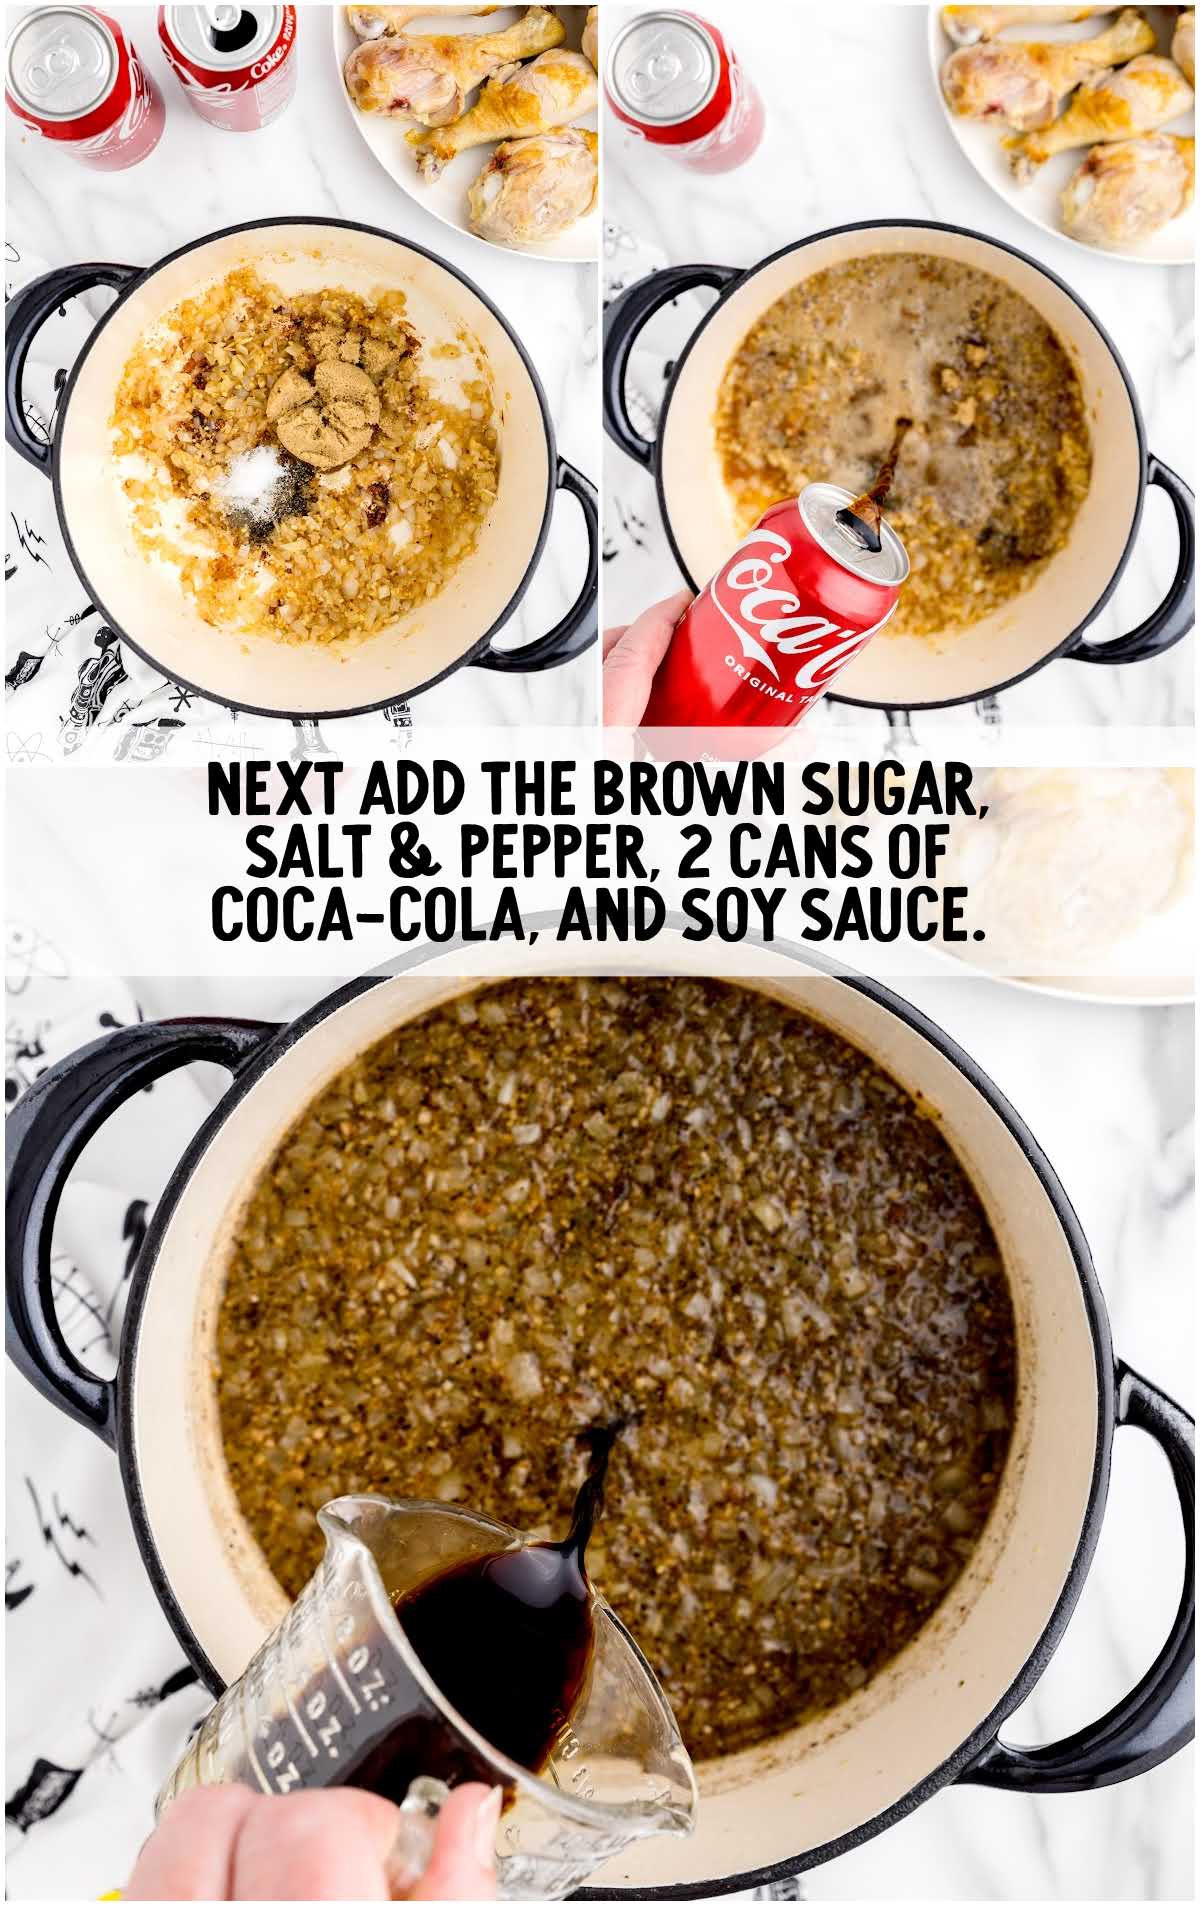 brown sugar, salt, pepper, coca-cola, and soy sauce added to the ingredients in the pot